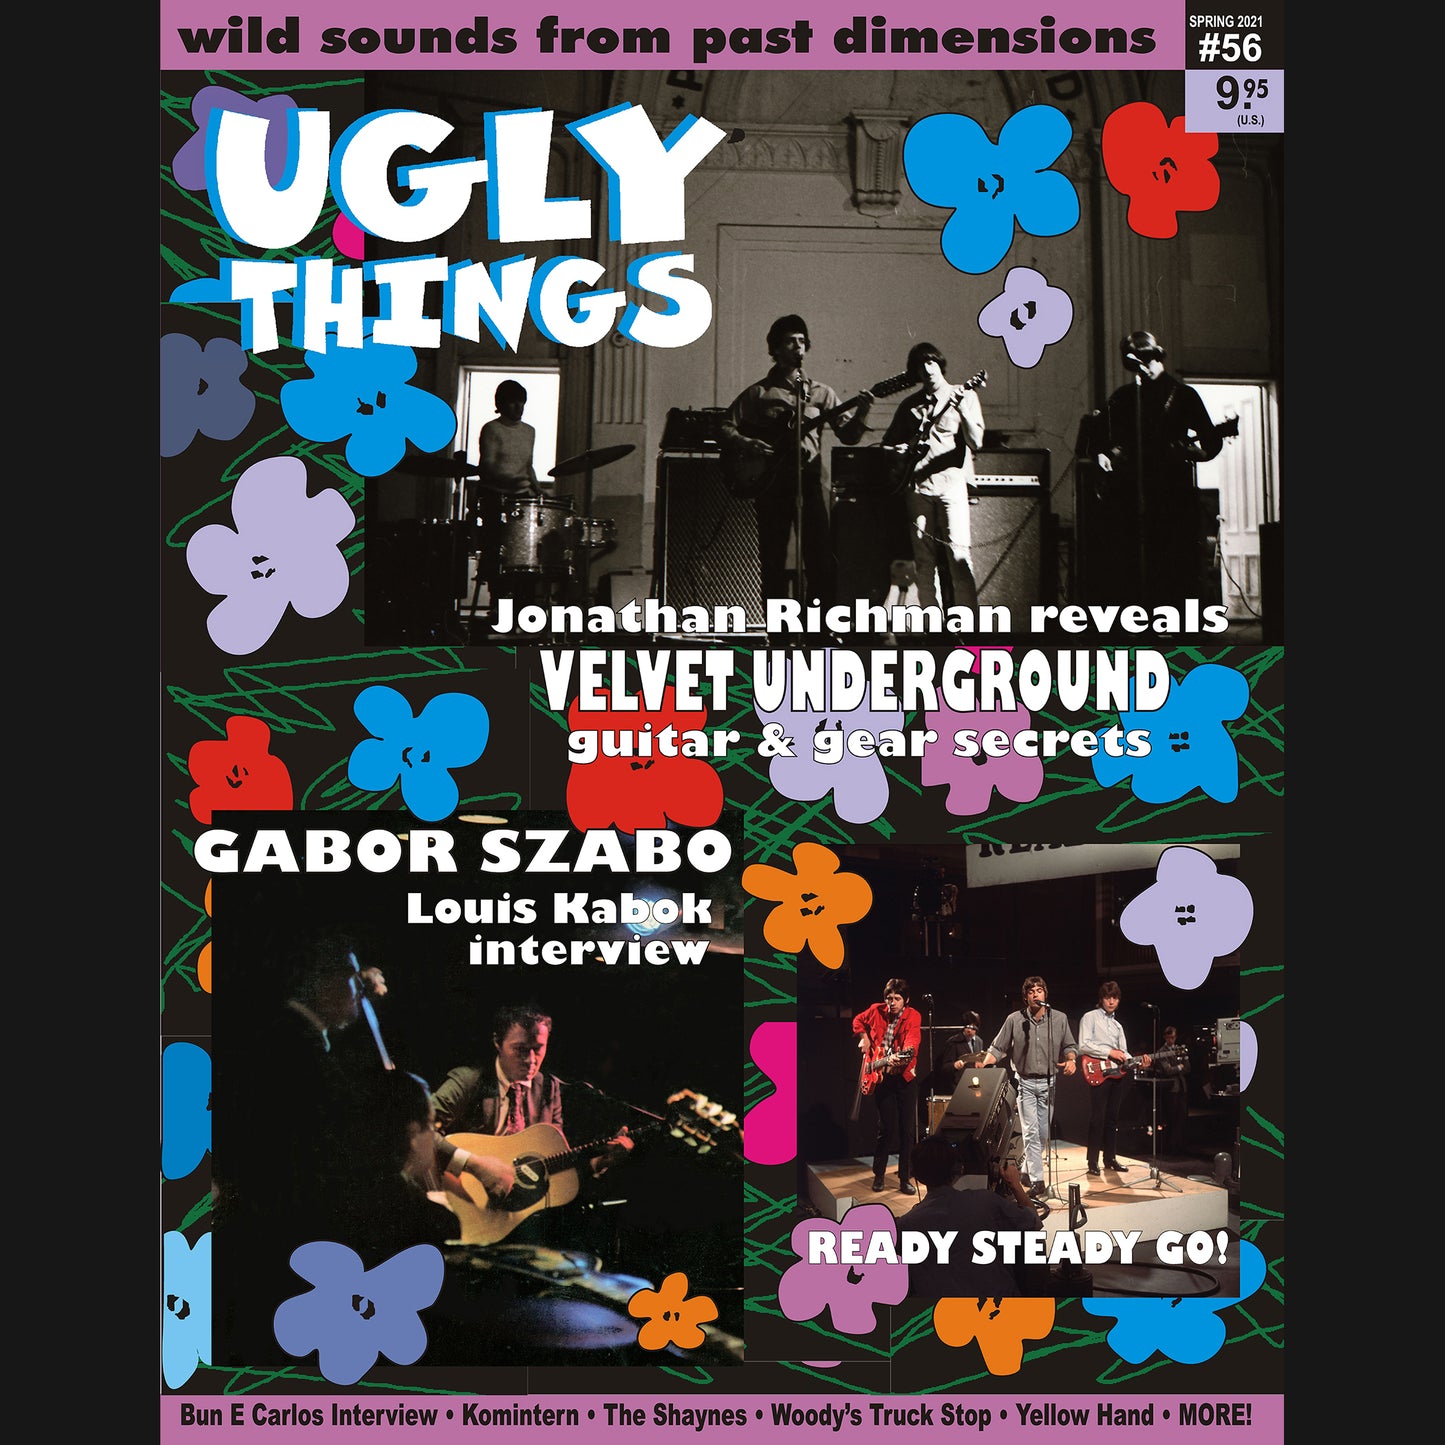 UGLY THINGS - "ISSUE #56" MAGAZINE